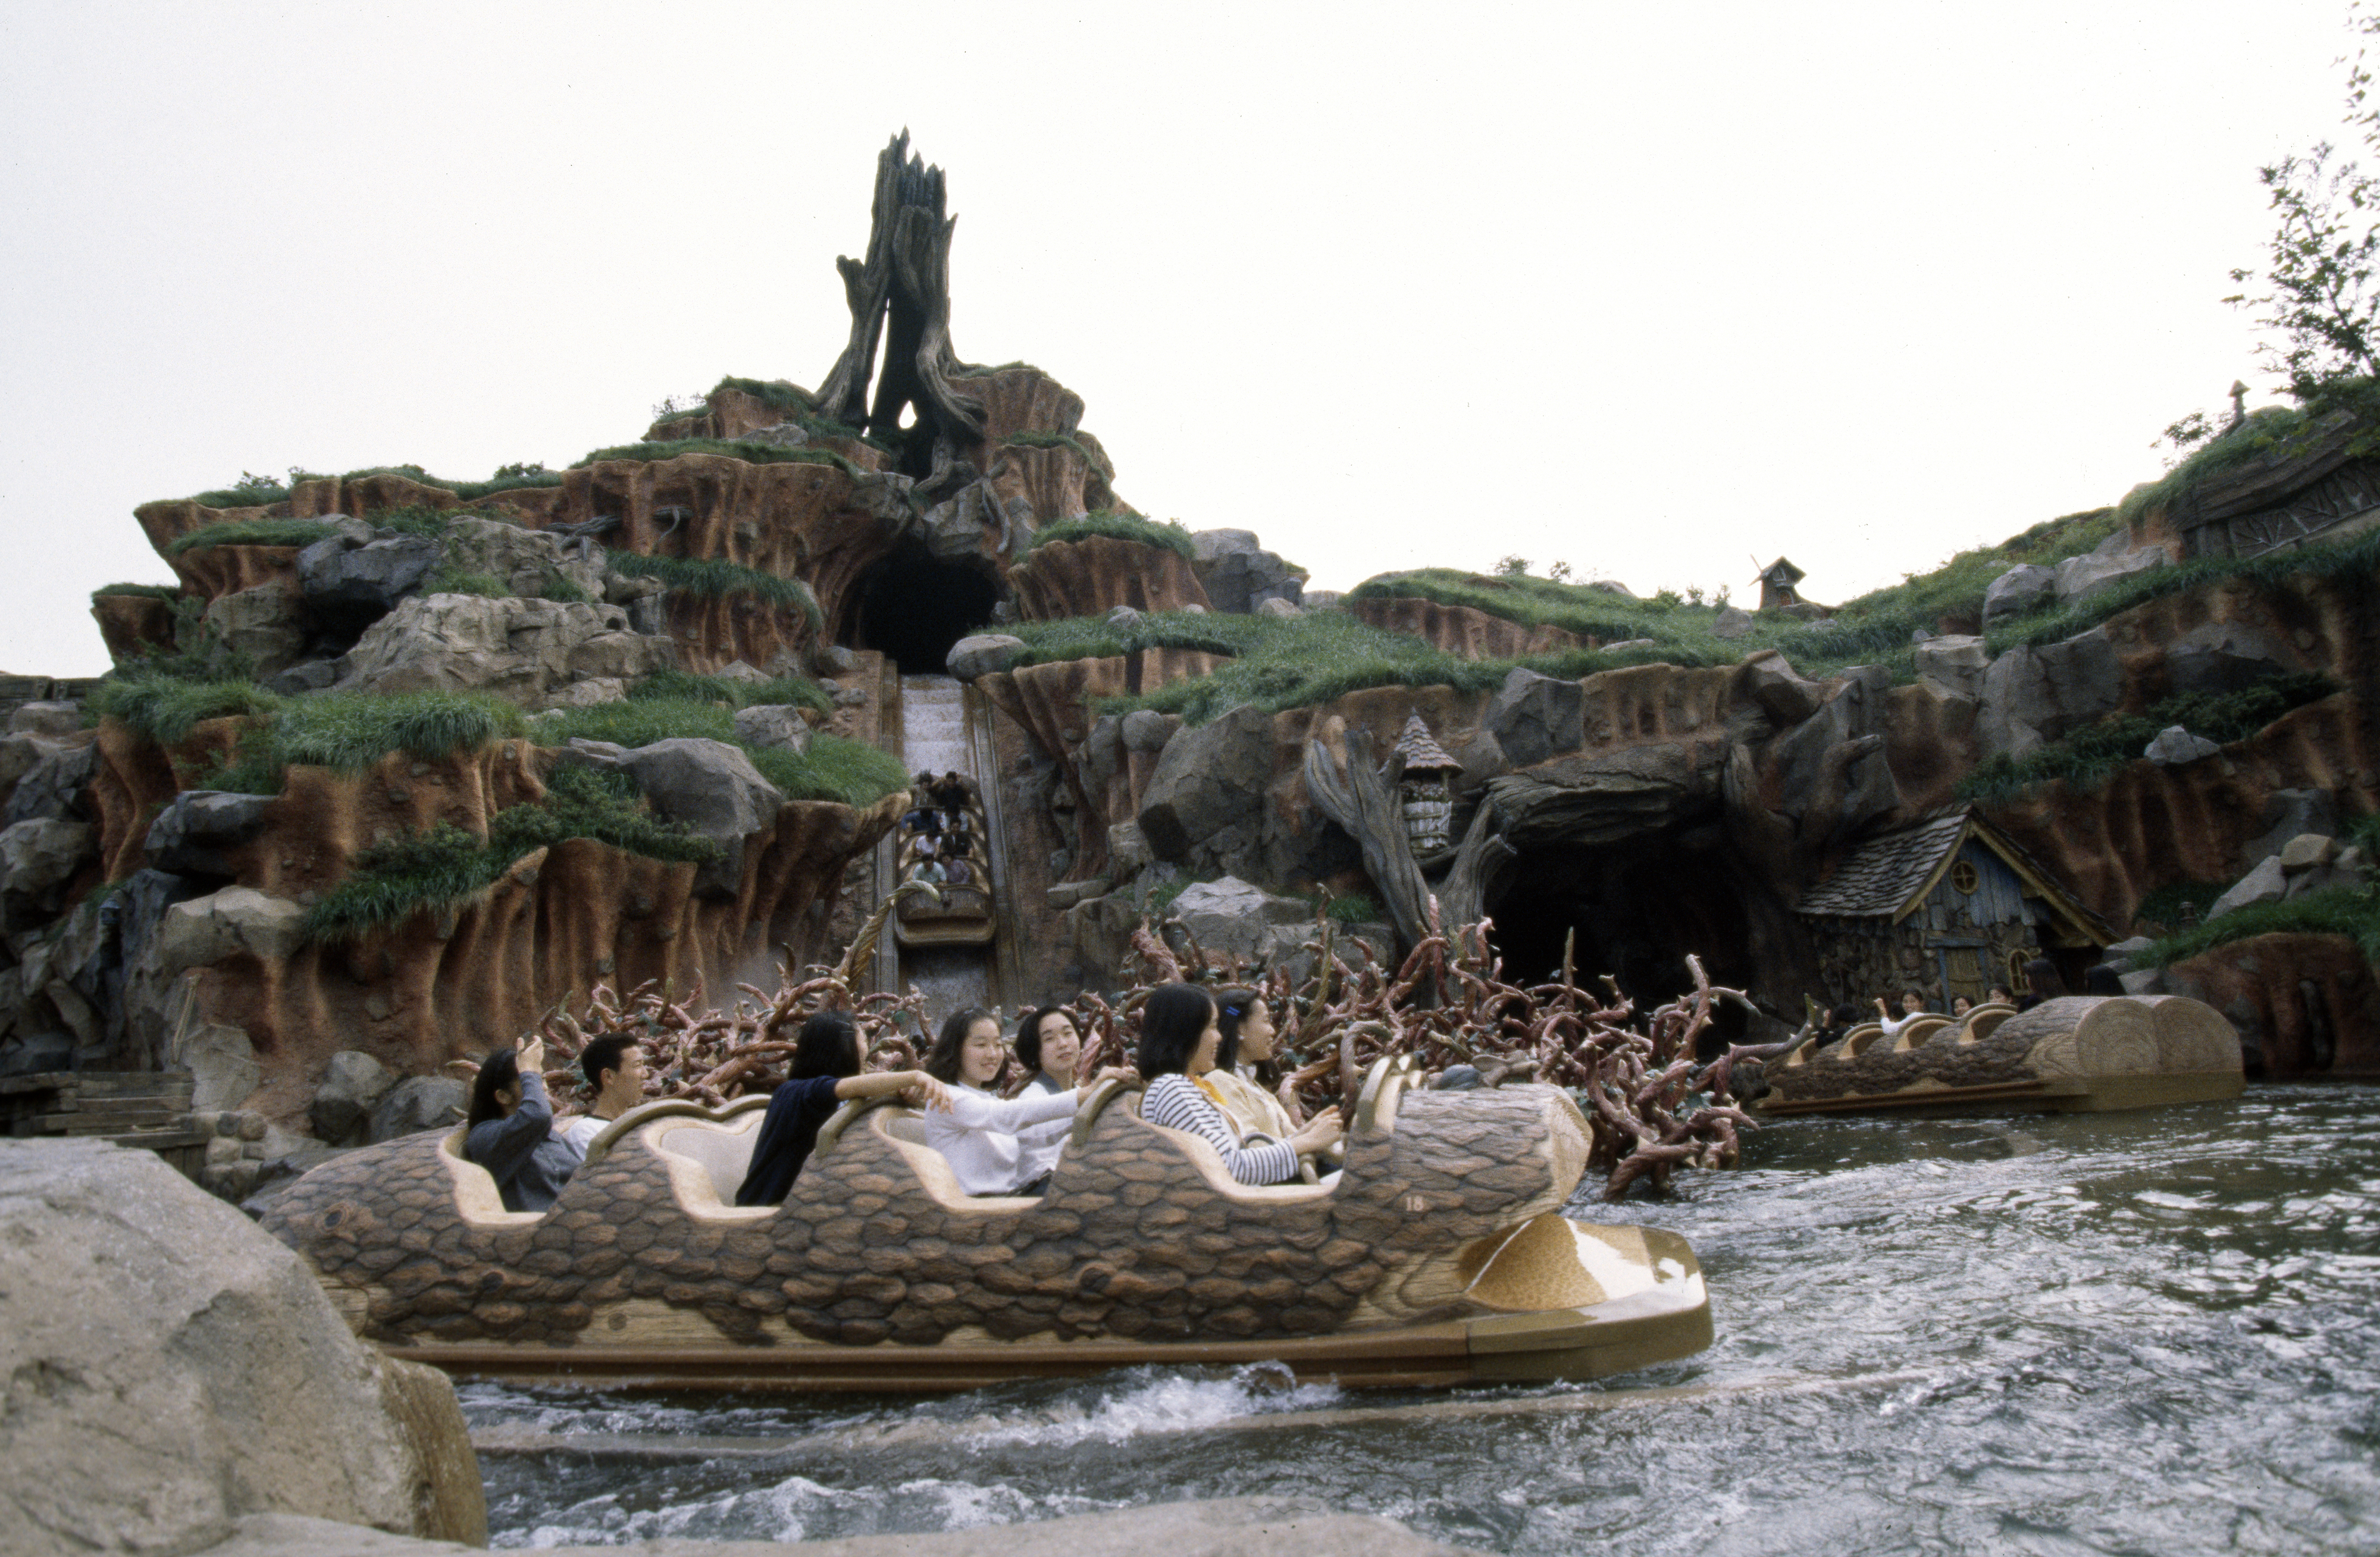 People riding log boats at Splash Mountain, an outdoor amusement park water ride with animated characters and steep drops